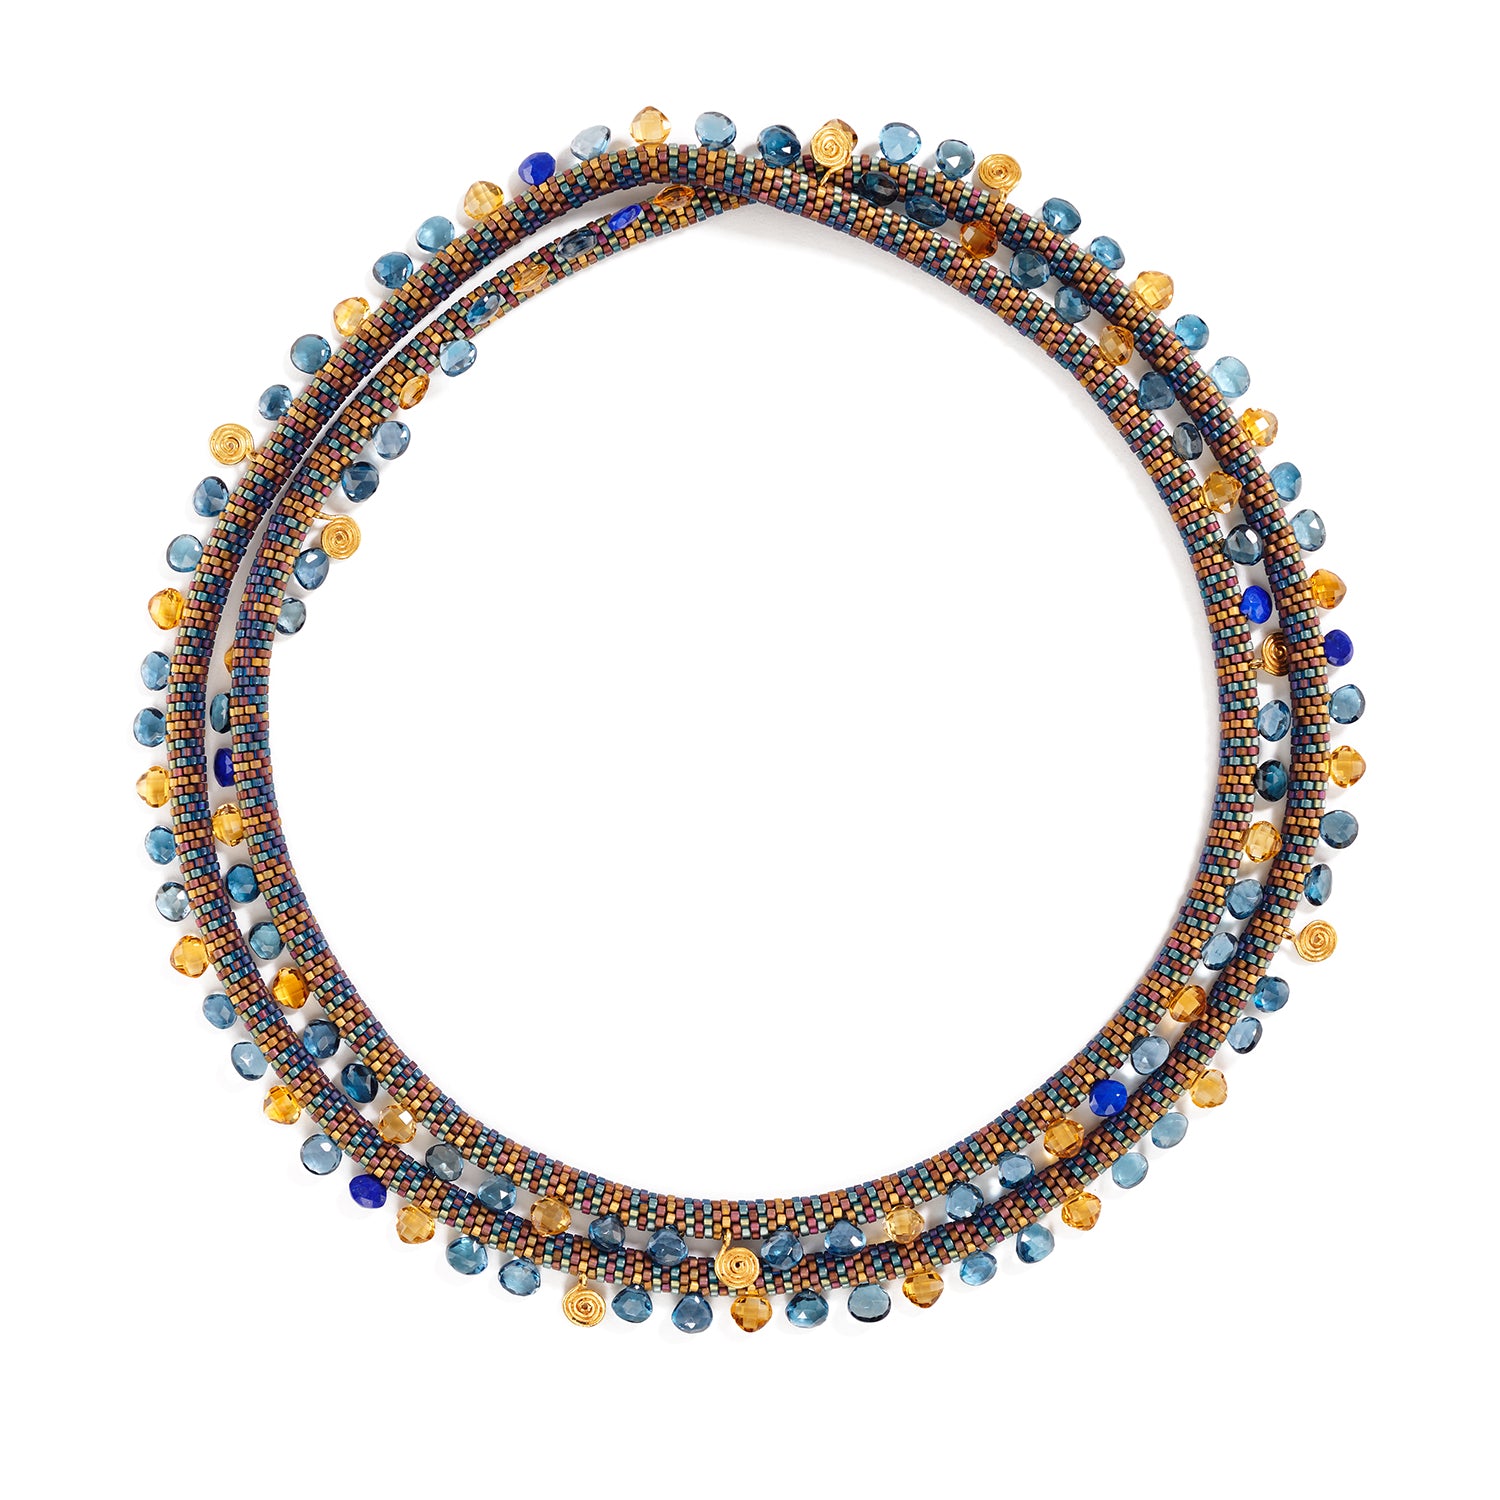 Lyda Pattern Necklace with Topaz, Citrine and Lapis